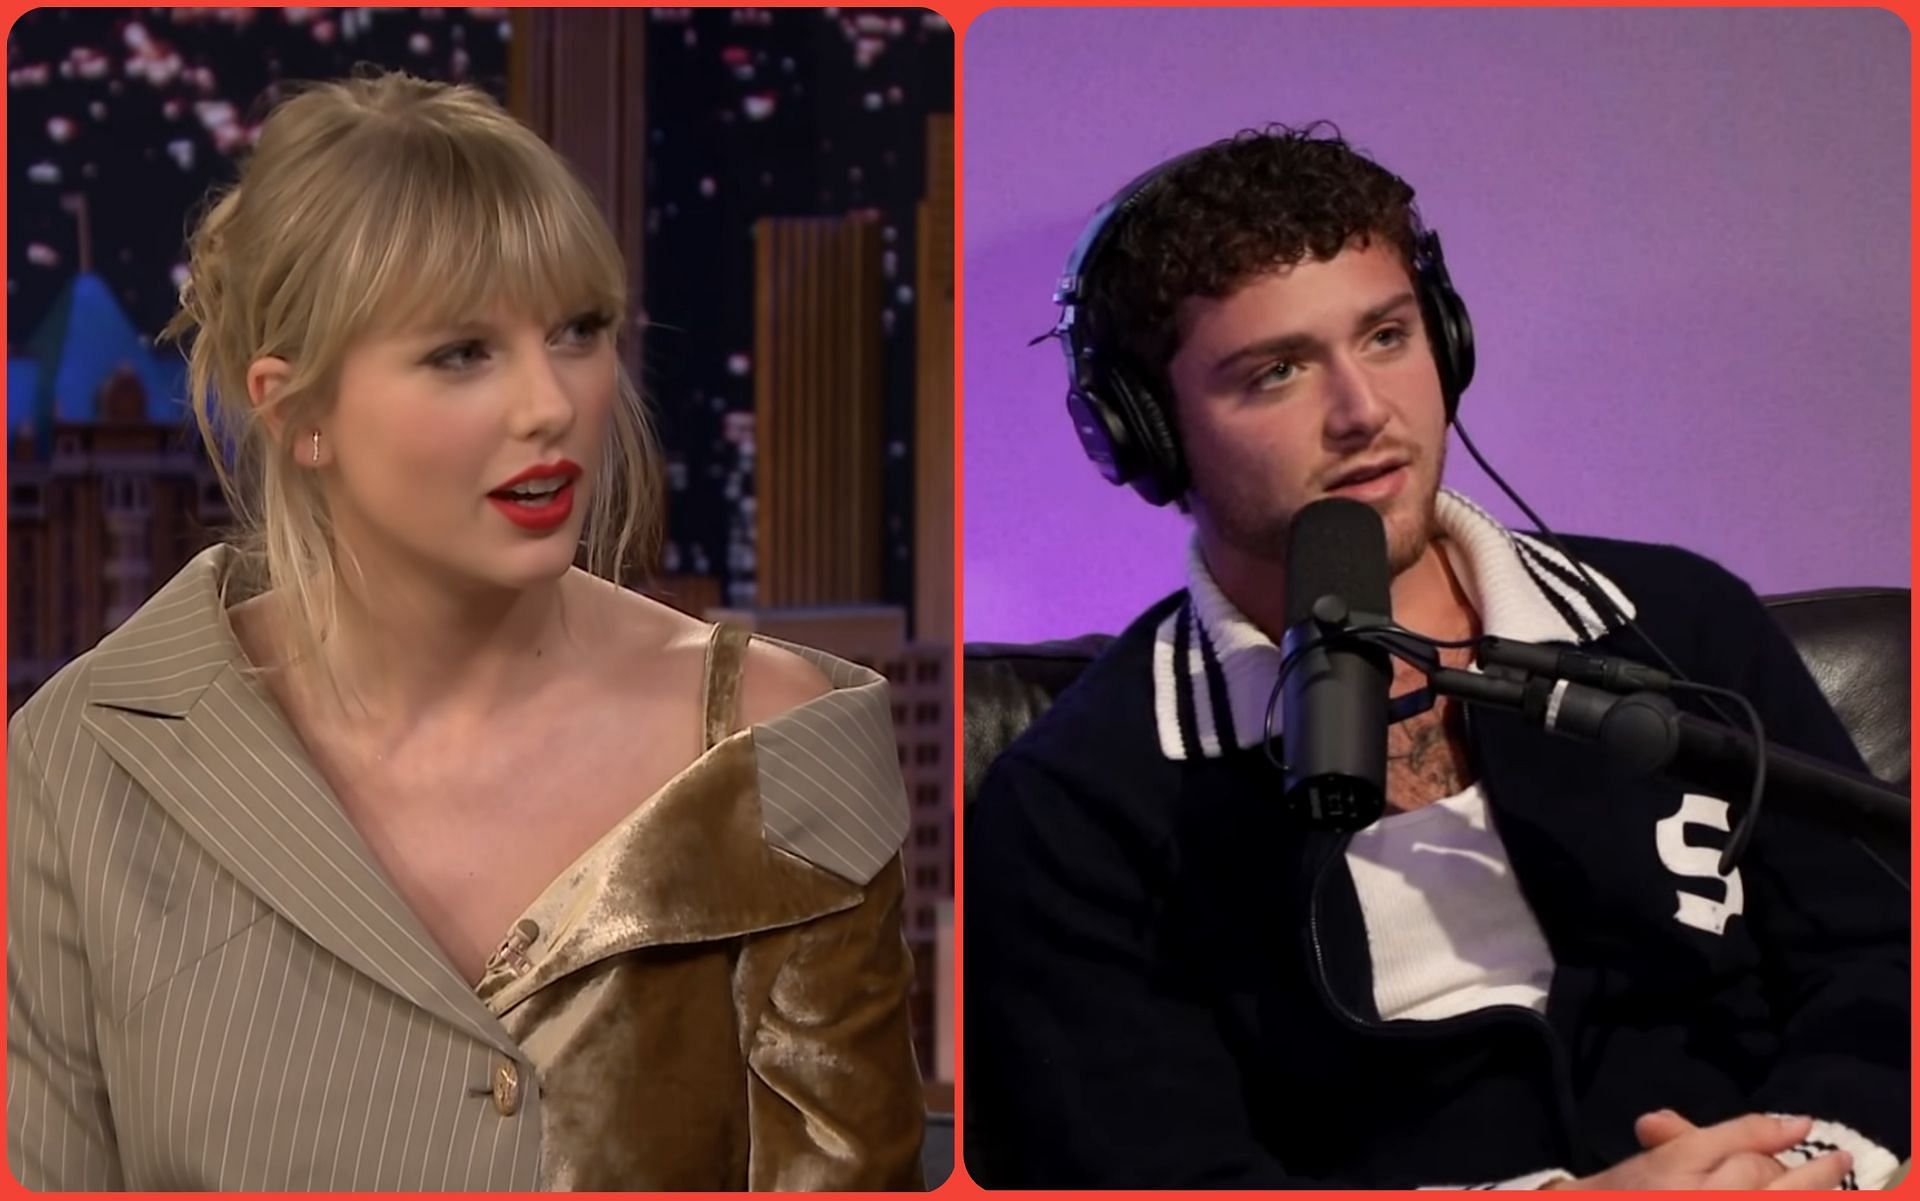 Bazzi finally addresses the &quot;Taylor Swift thing&quot; (Images via YouTube channels: The Tonight Show Starring Jimmy Fallon and Zach Sang Show)